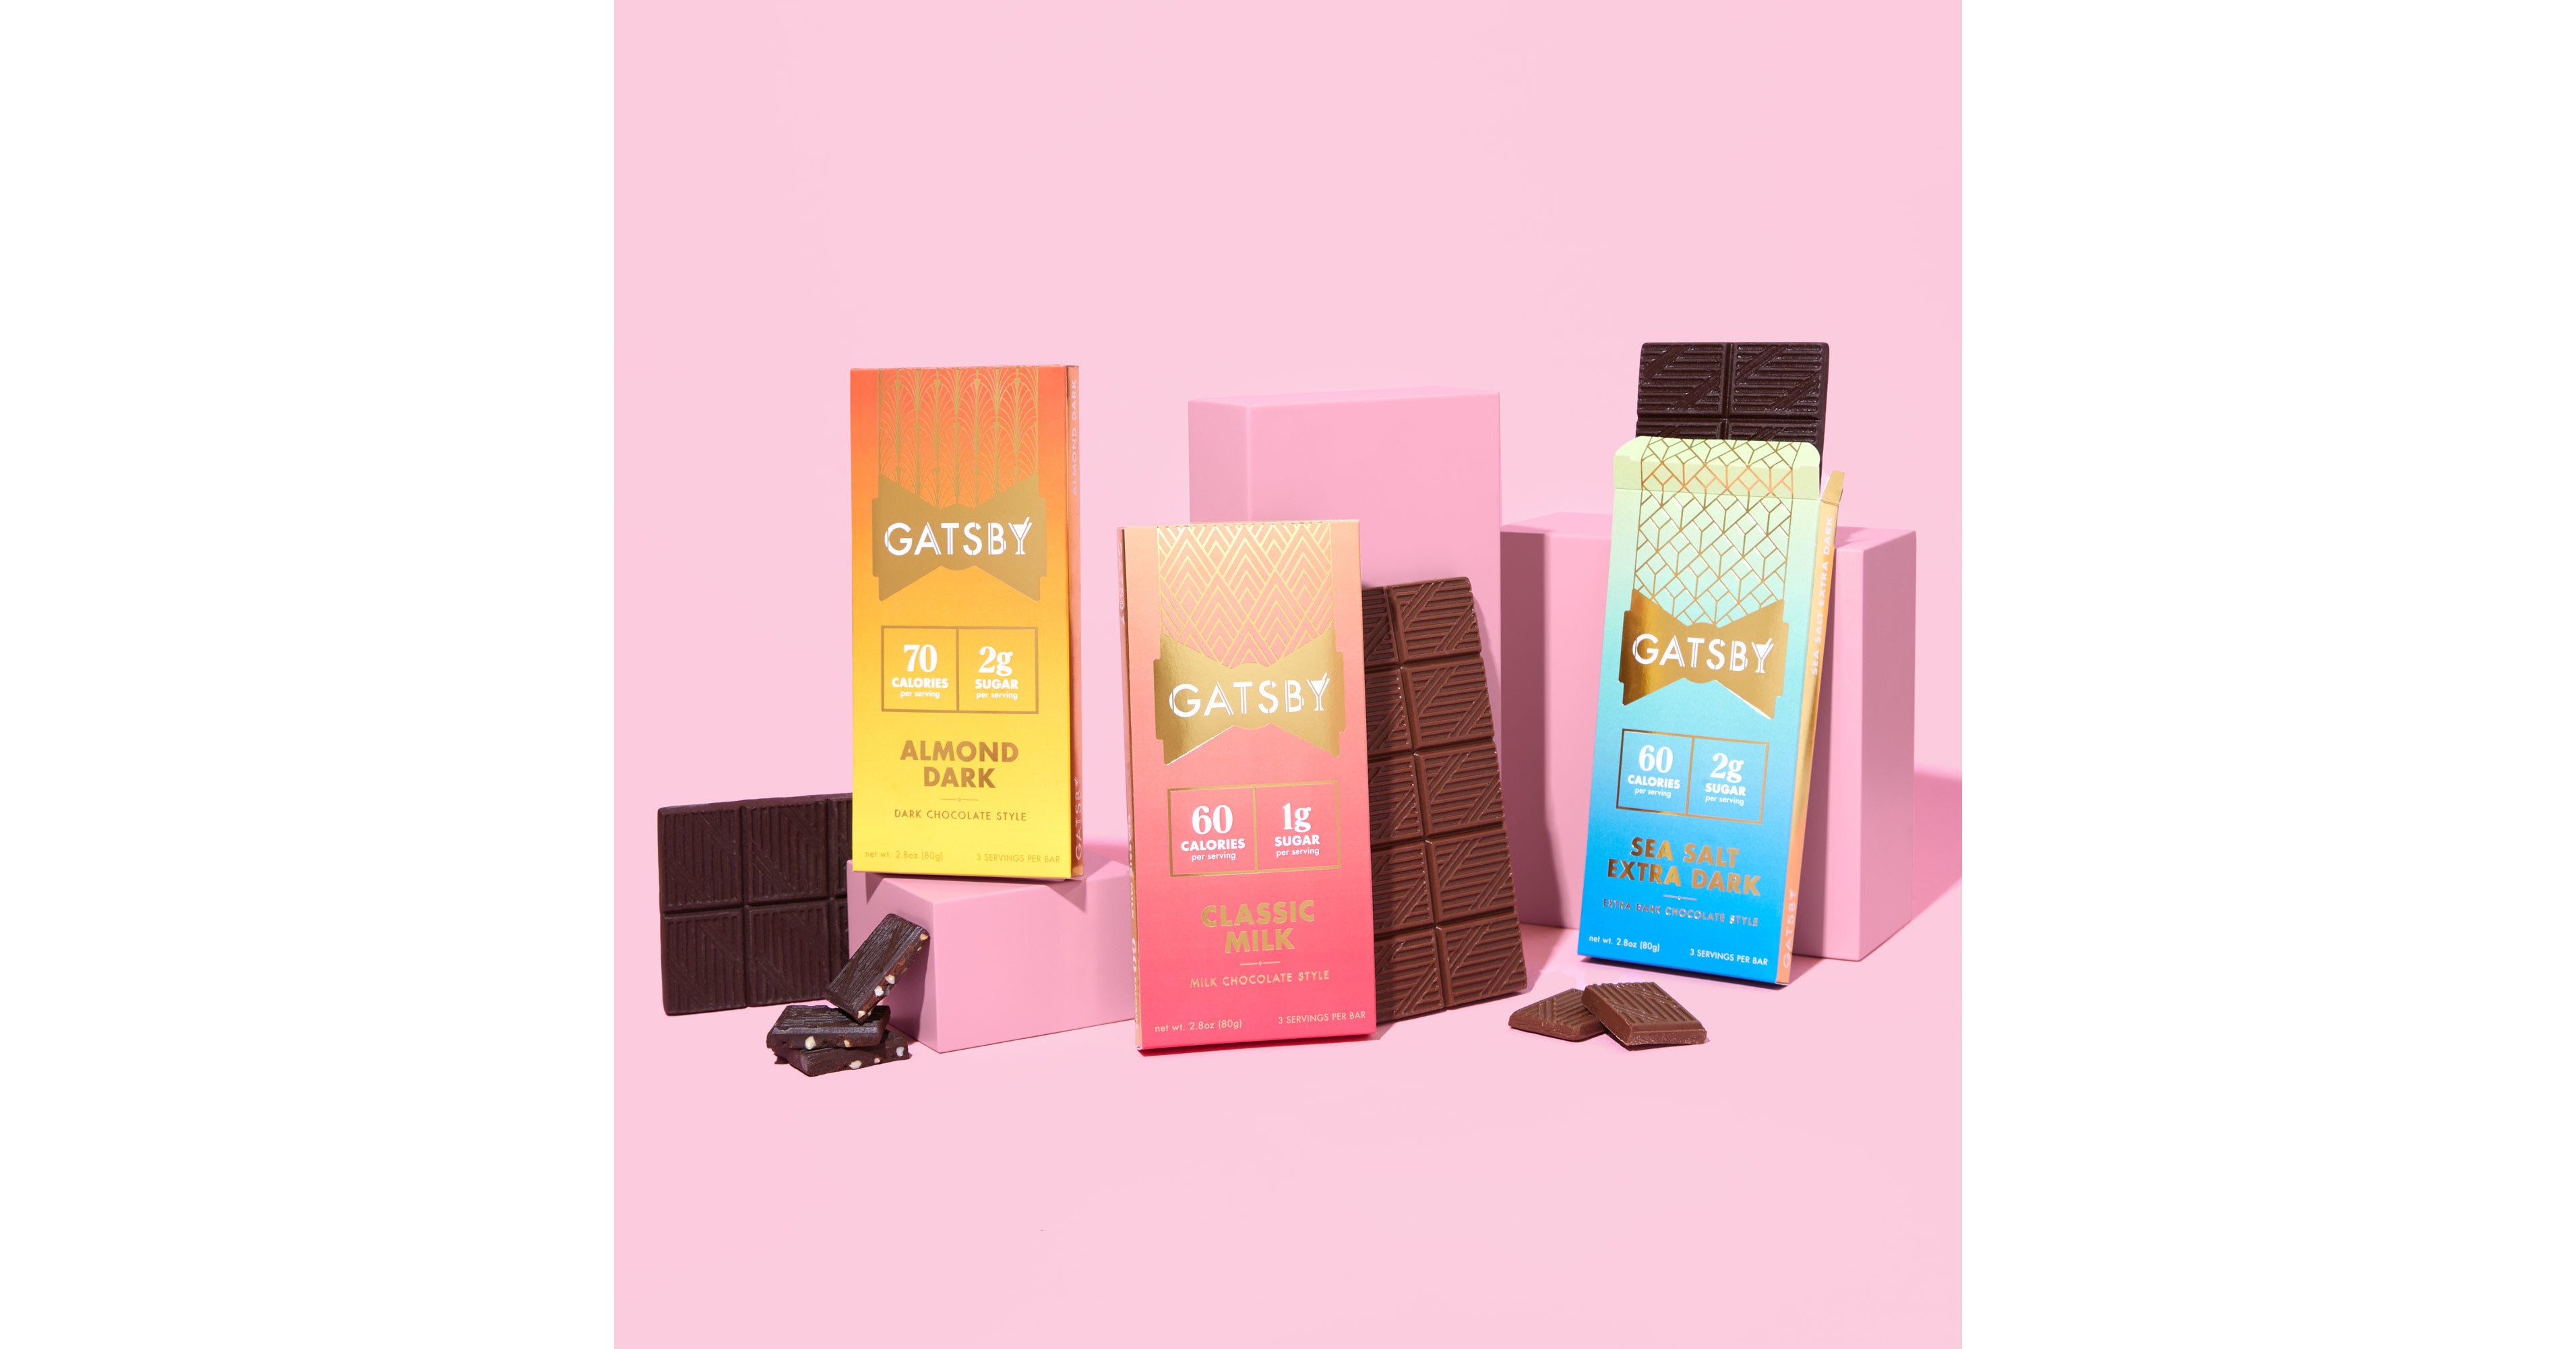 What You Need To Know About Gatsby Chocolate From Shark Tank